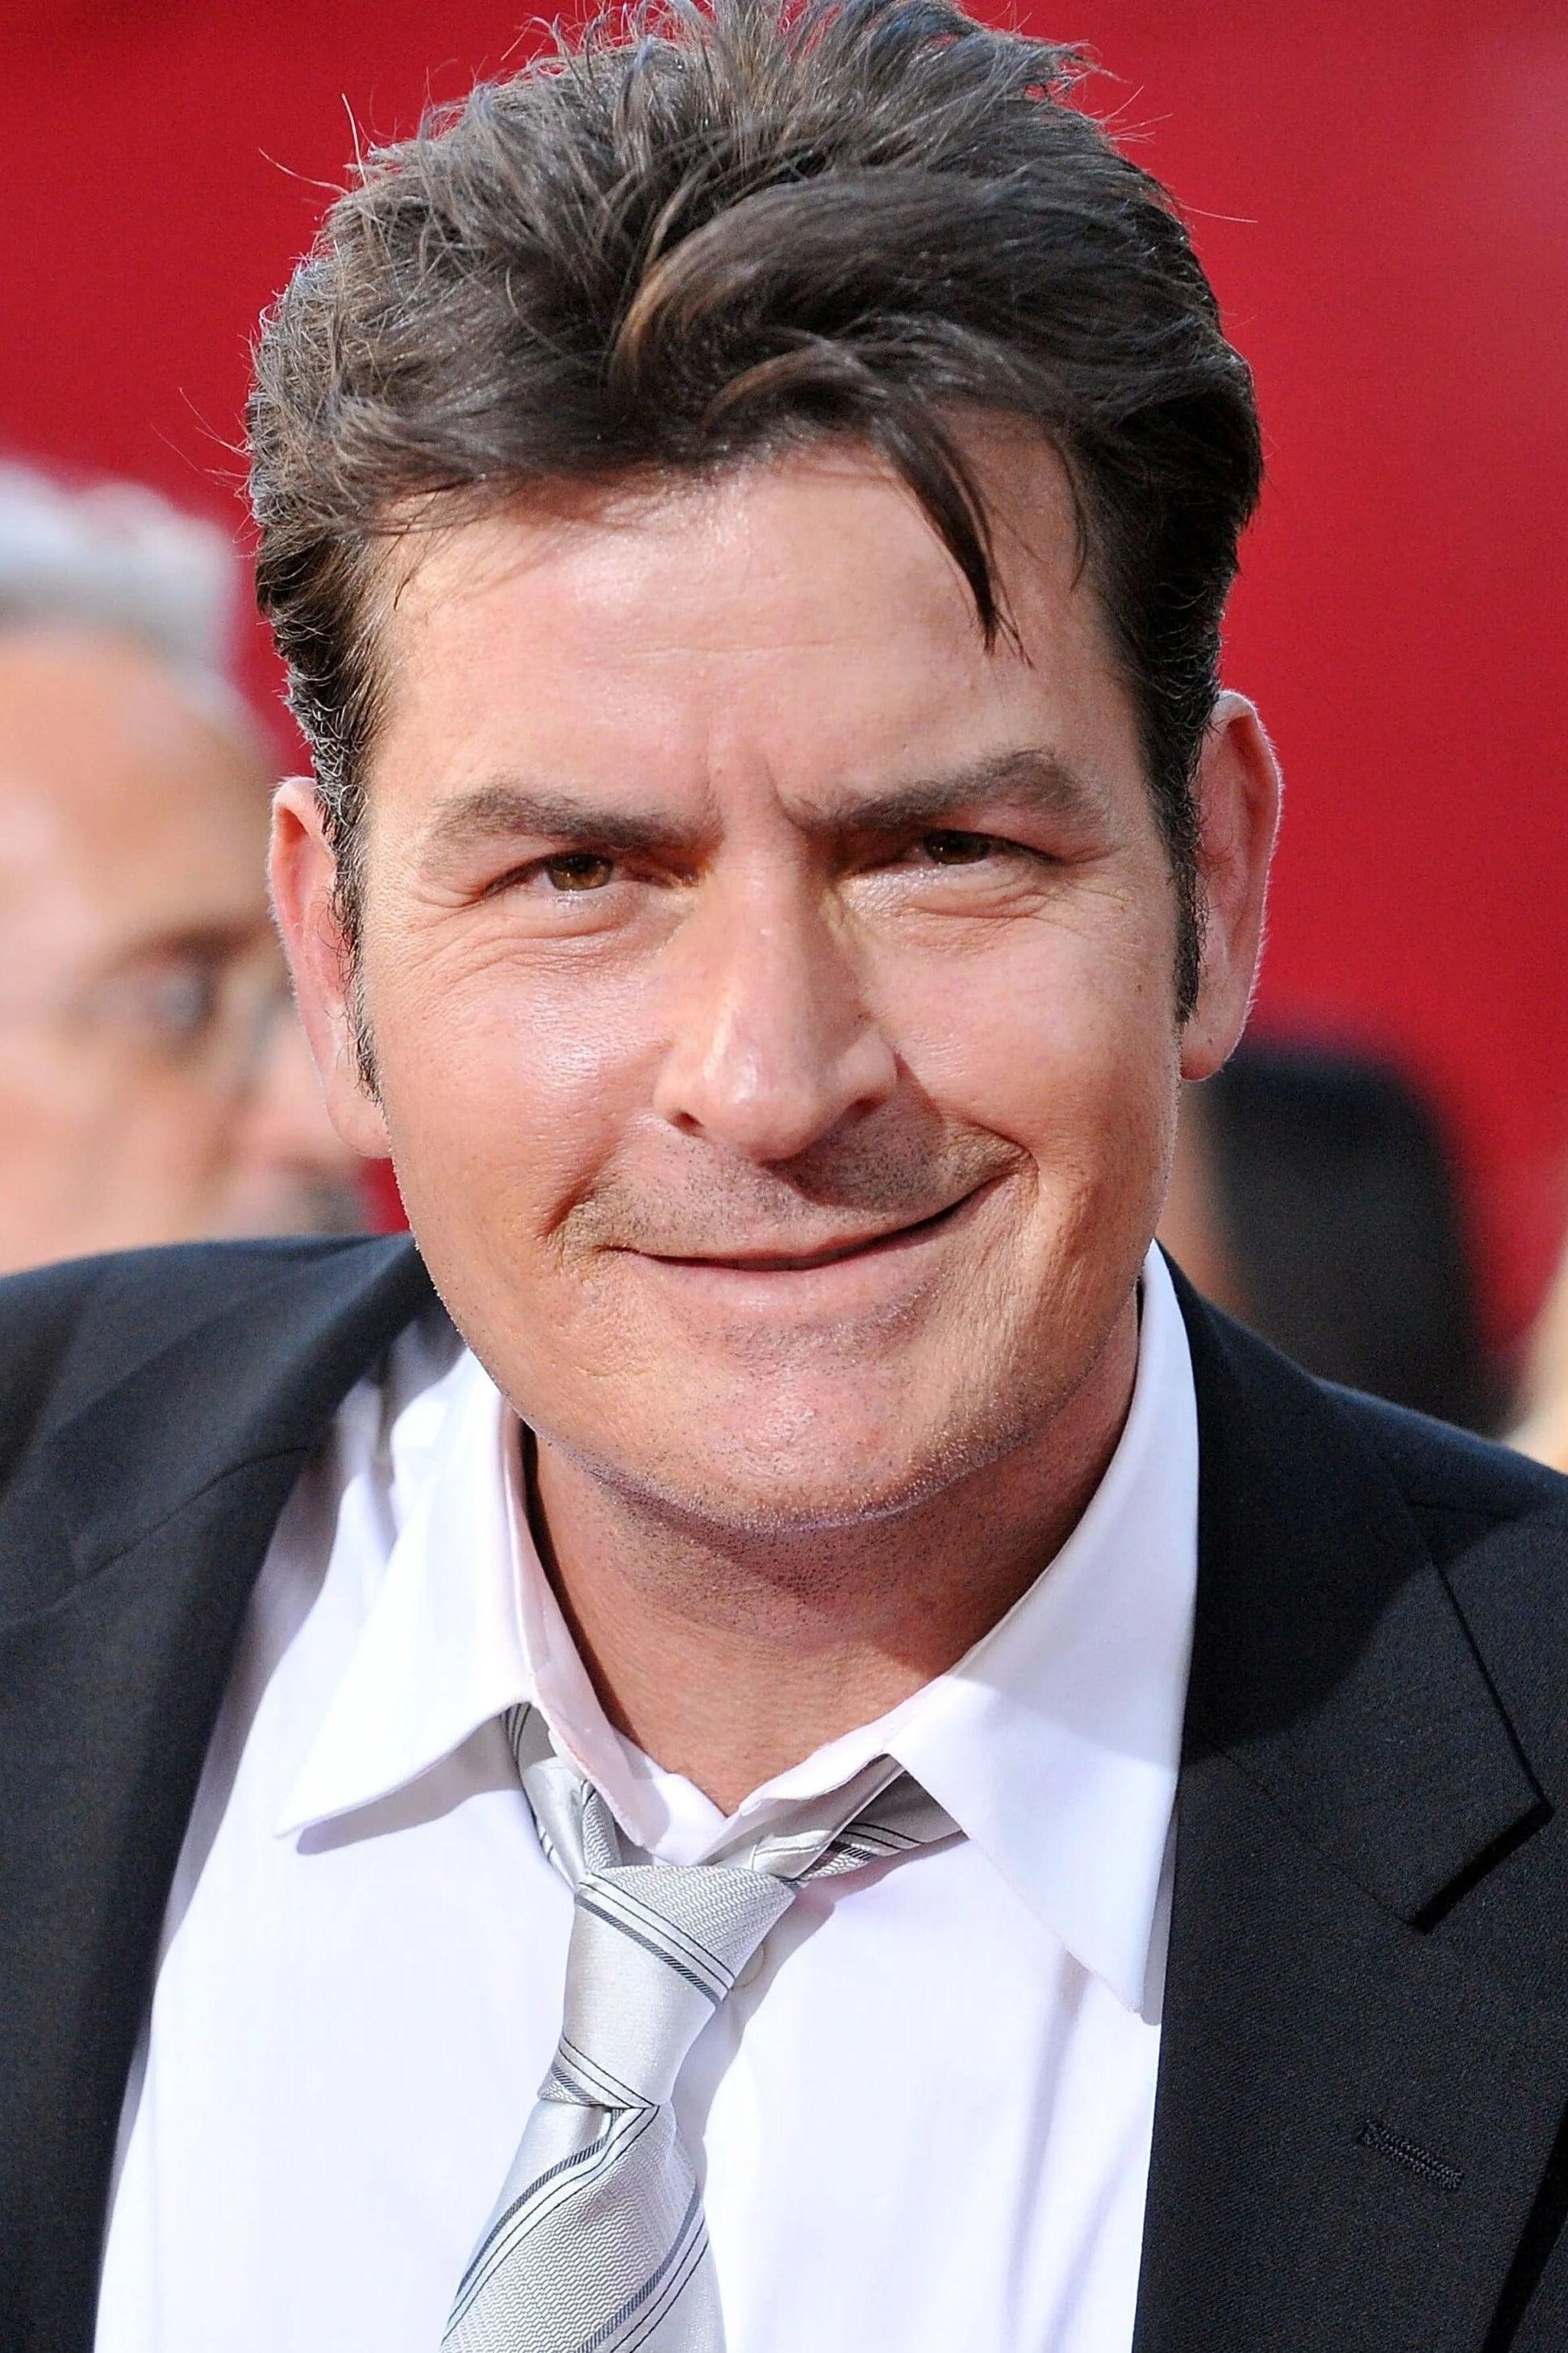 Charlie Sheen | Jake Kesey / The Wraith